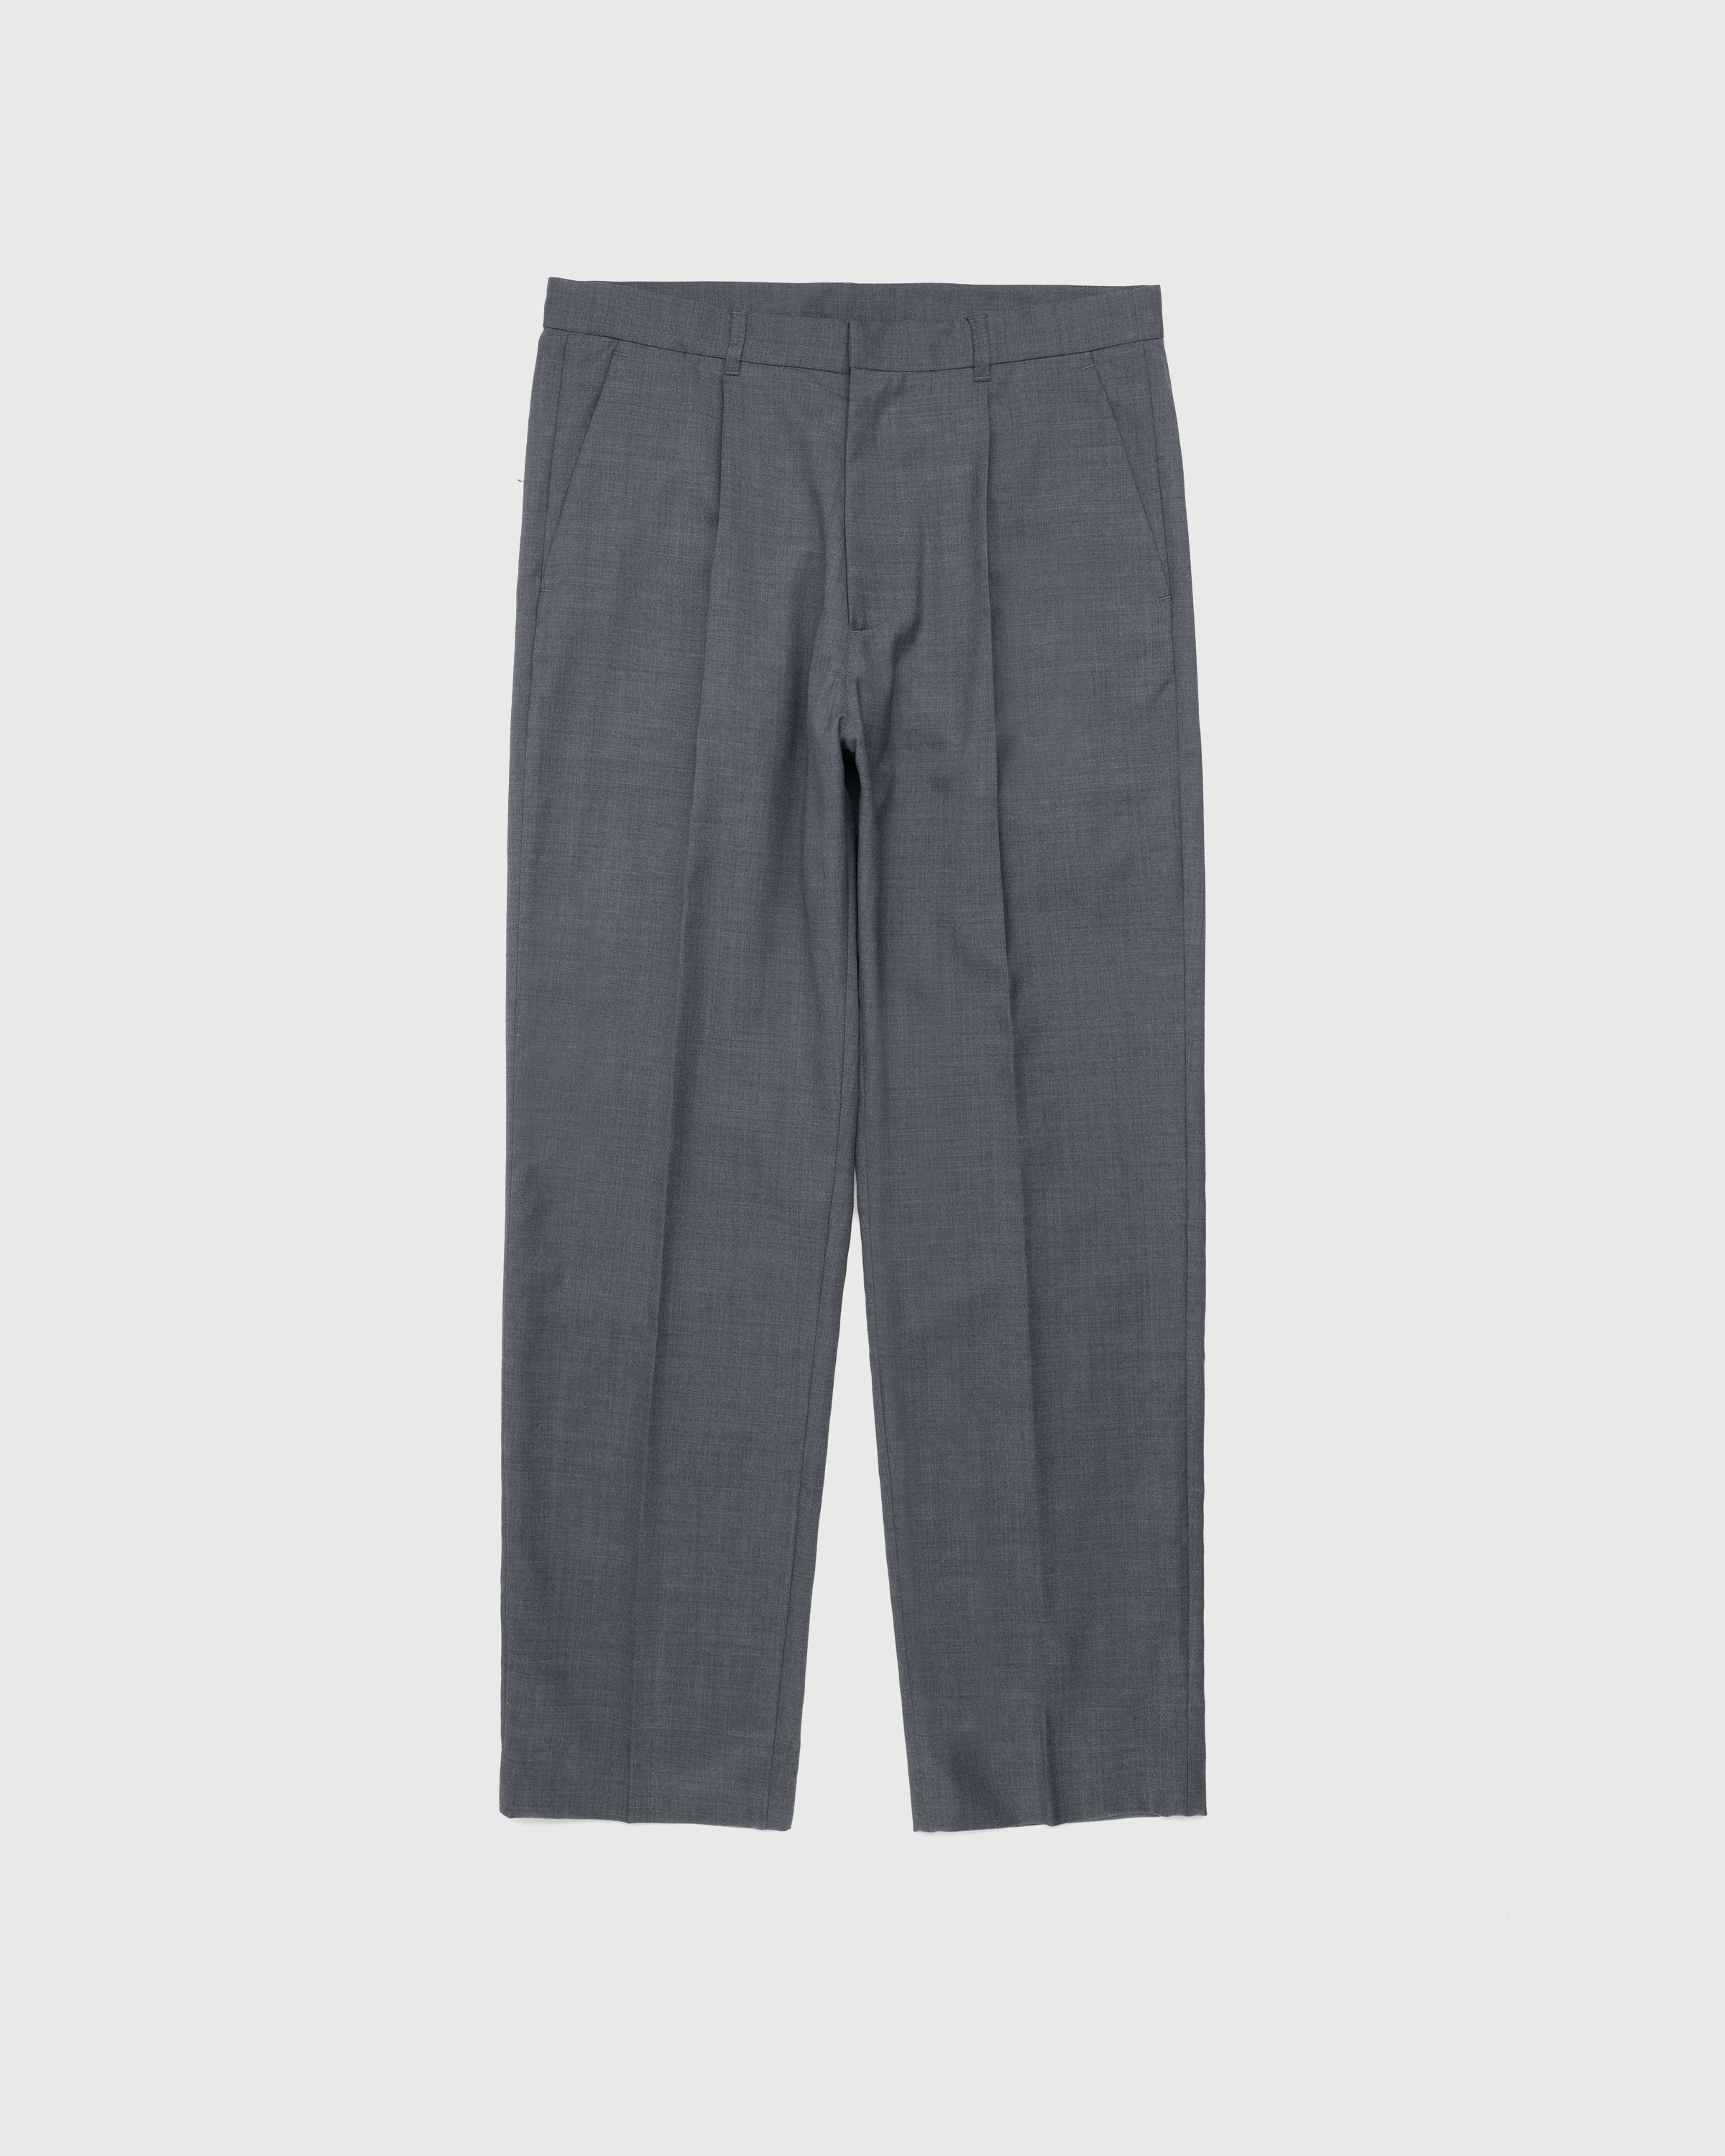 Highsnobiety - Tropical Wool Suiting Pants Grey - Clothing - Grey - Image 1